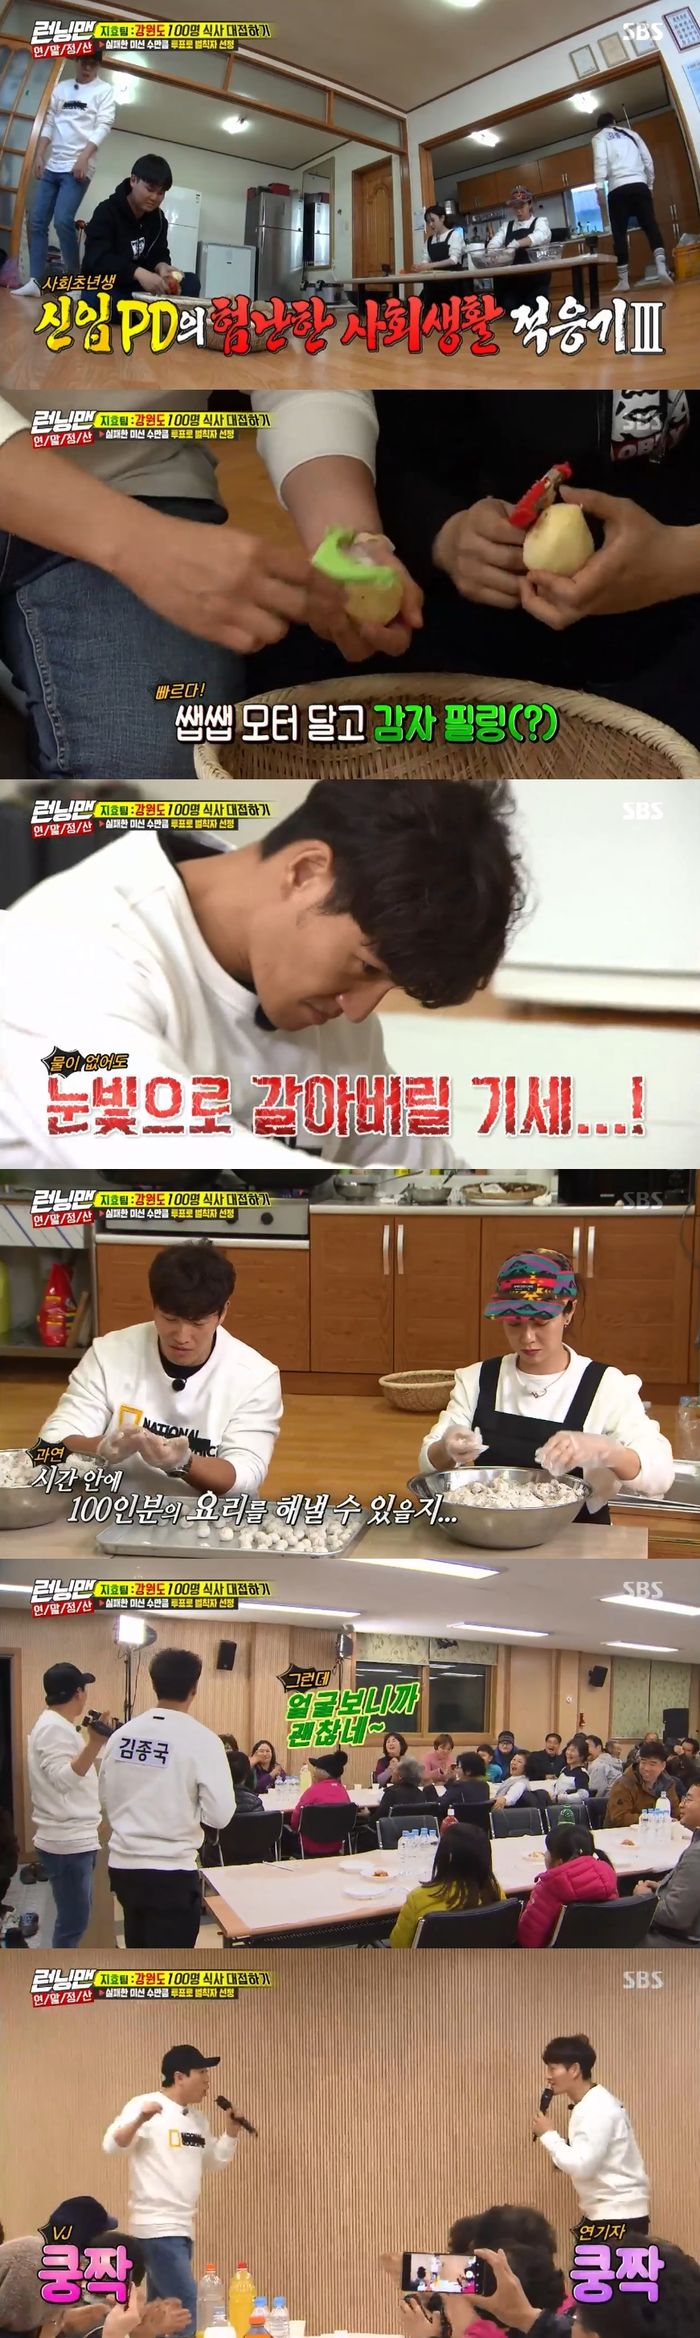 Kim Jong-kook and Yang Se-chan held a concert in front of the village elder.On SBS Running Man broadcast on the 16th, Song Ji-hyos team performed a mission to serve 100 people in Gangwon Province.Under the direction of Byul, Ji Hyo team began to make a potato cunt and 100 servings of meat, and the new PD who came with him also made materials.But looking at the new PD, who cuts potatoes poorly, Yang Se-chan said, Im not doing it, he said.Byul prepared the meat skillfully, and he completed the meat perfectly, using coffee powder, laurel leaves, and beer to catch the smell of meat.Then Byul started making seafood and kimchi.Kim Jong-kook said, 100 people are not normal. But when the promised dinner time came near, the elders of the village were already in for dinner.Kim Jong-kook and Yang Se-chan went to the village where the village elder was.Kim Jong-kook and Yang Se-chan performed an unexpected year-end concert, singing on the spot, saying, Is it free to wait?Ji Hyo team managed to make a dinner mission to 100 villagers within the time limit.